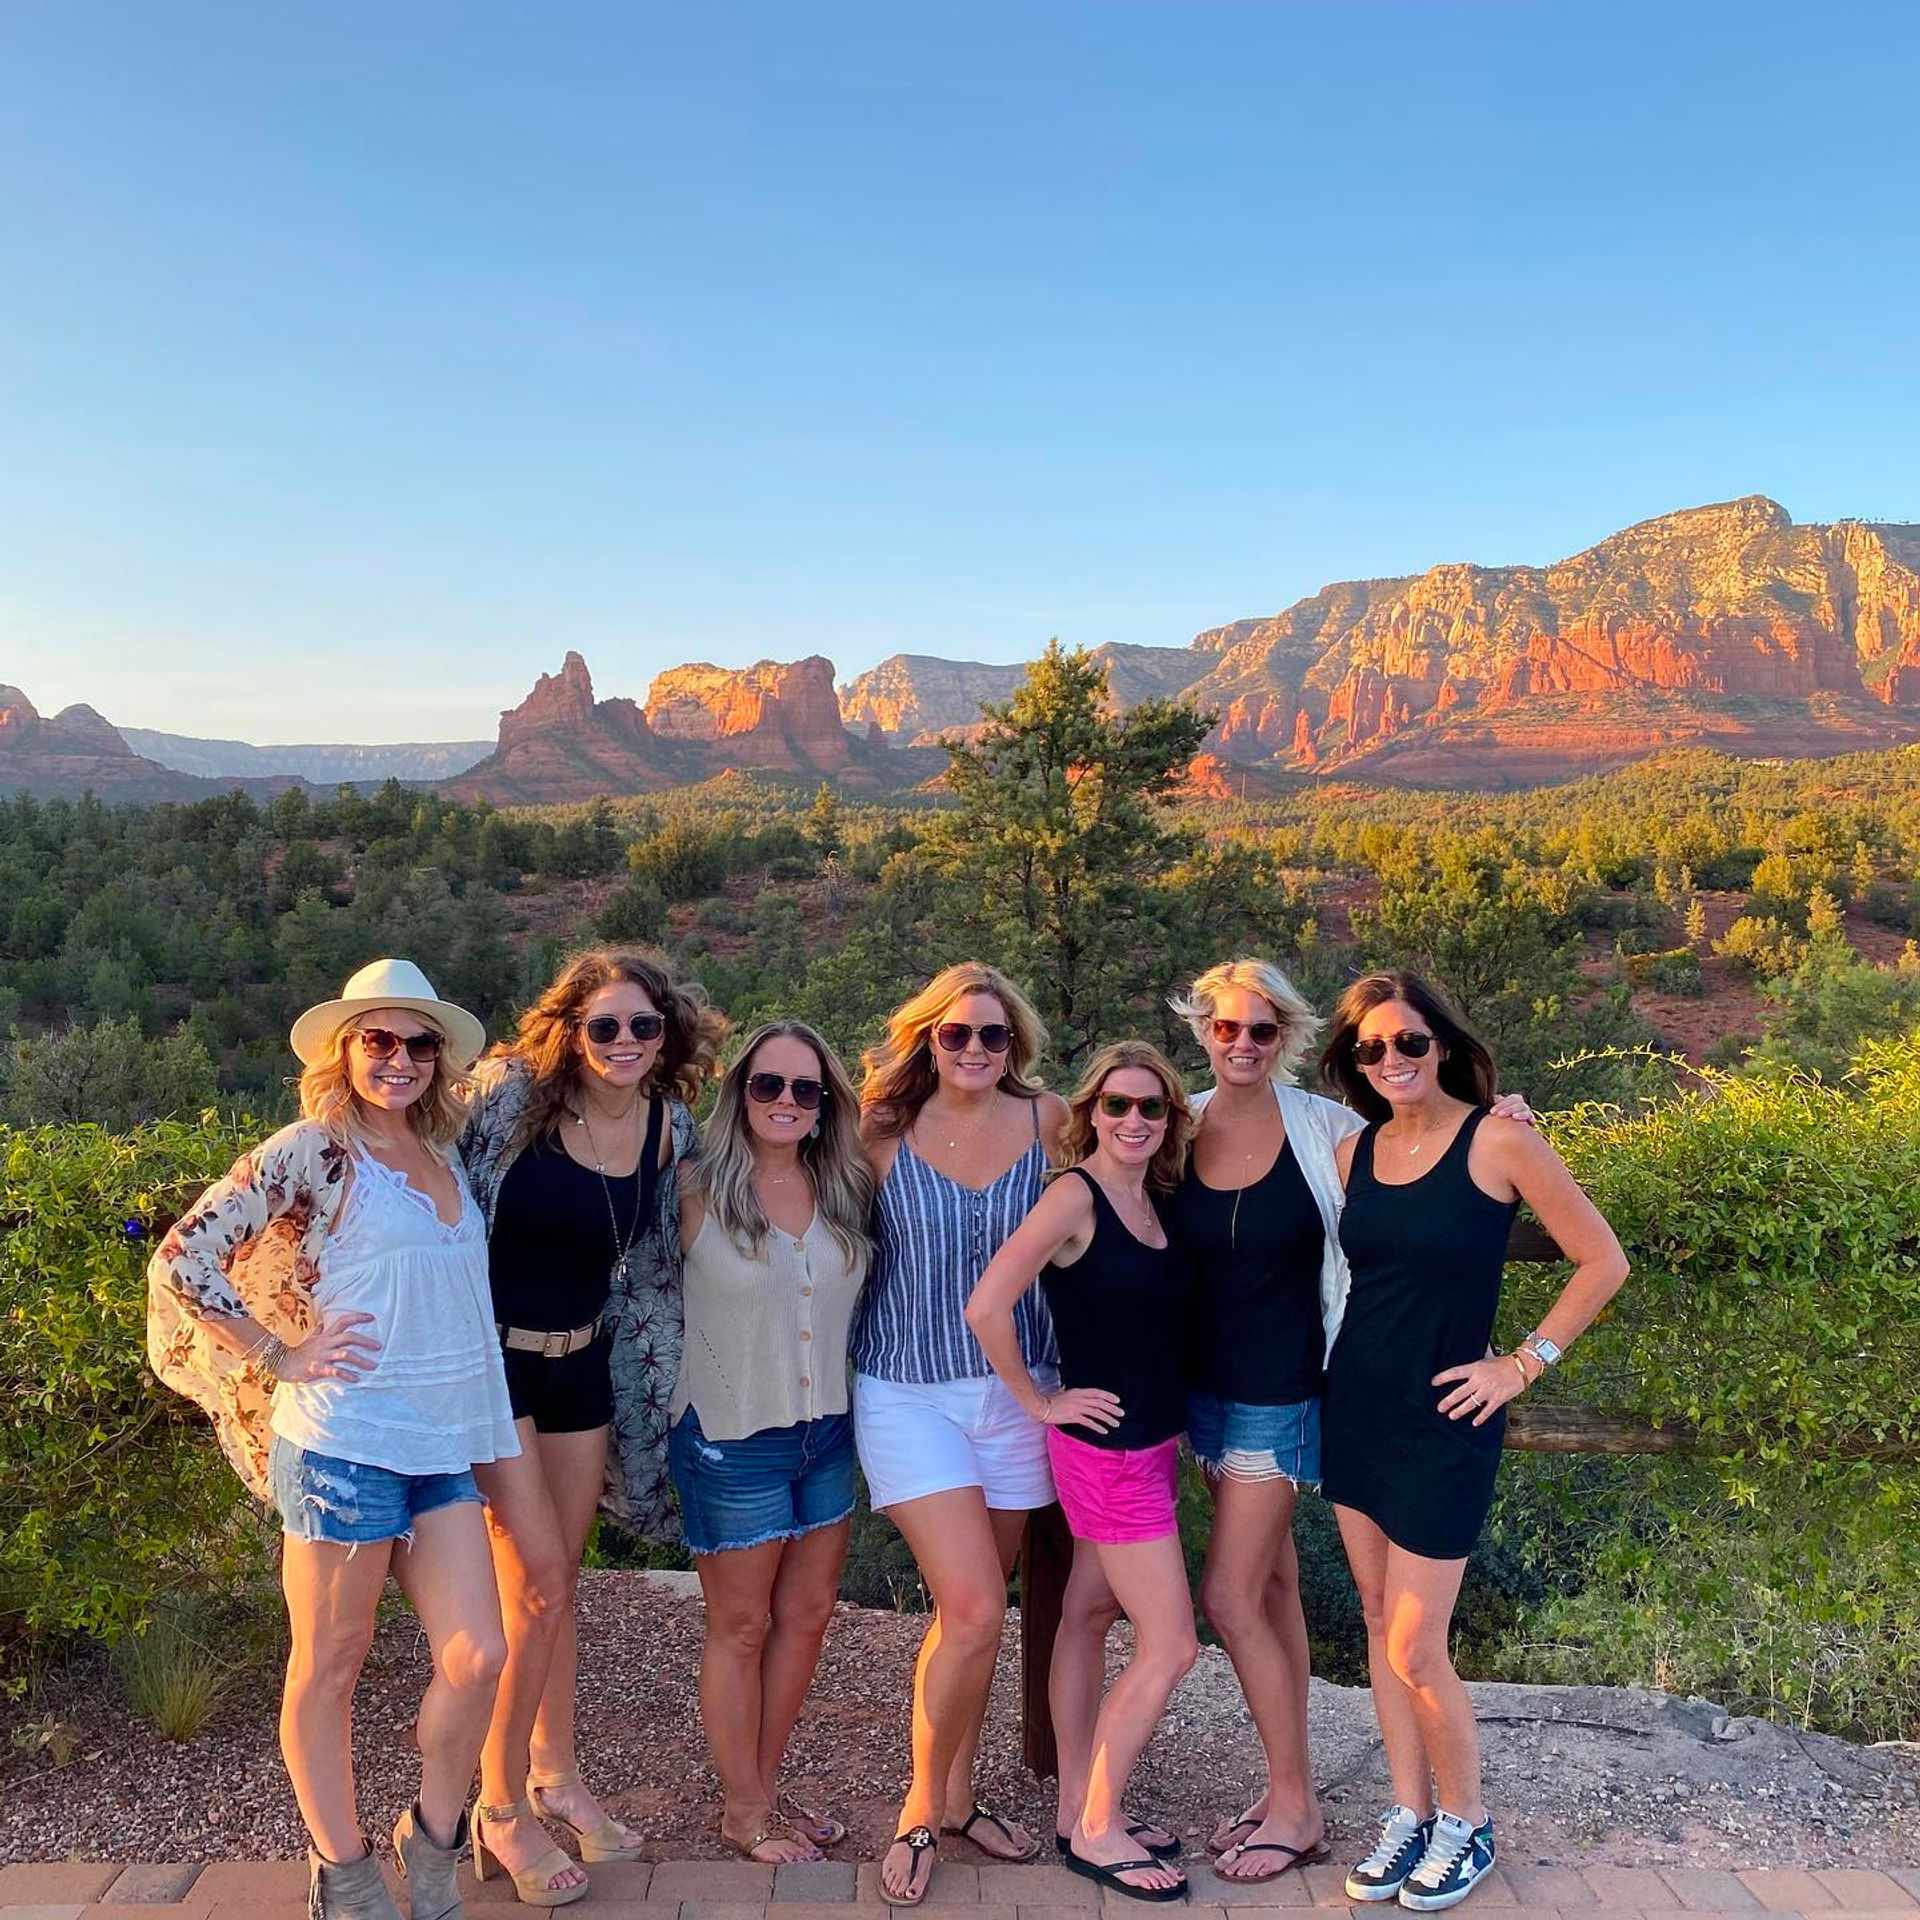 All-inclusive Private Wine Tasting Tour of Sedona Region: Transportation, Lunch, & Wine Flights Included image 1